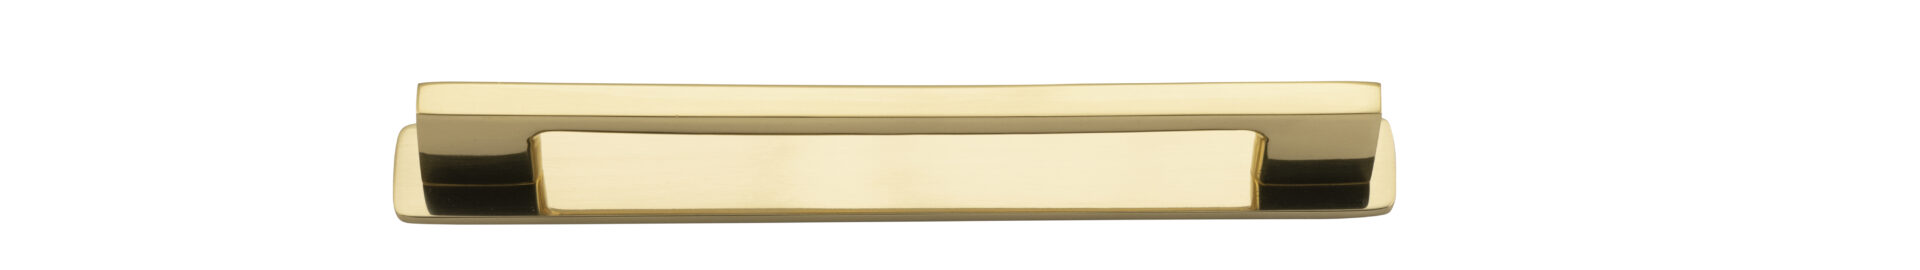 0516B - Cali Cabinet Pull with Backplate - CTC 160mm - Polished Brass